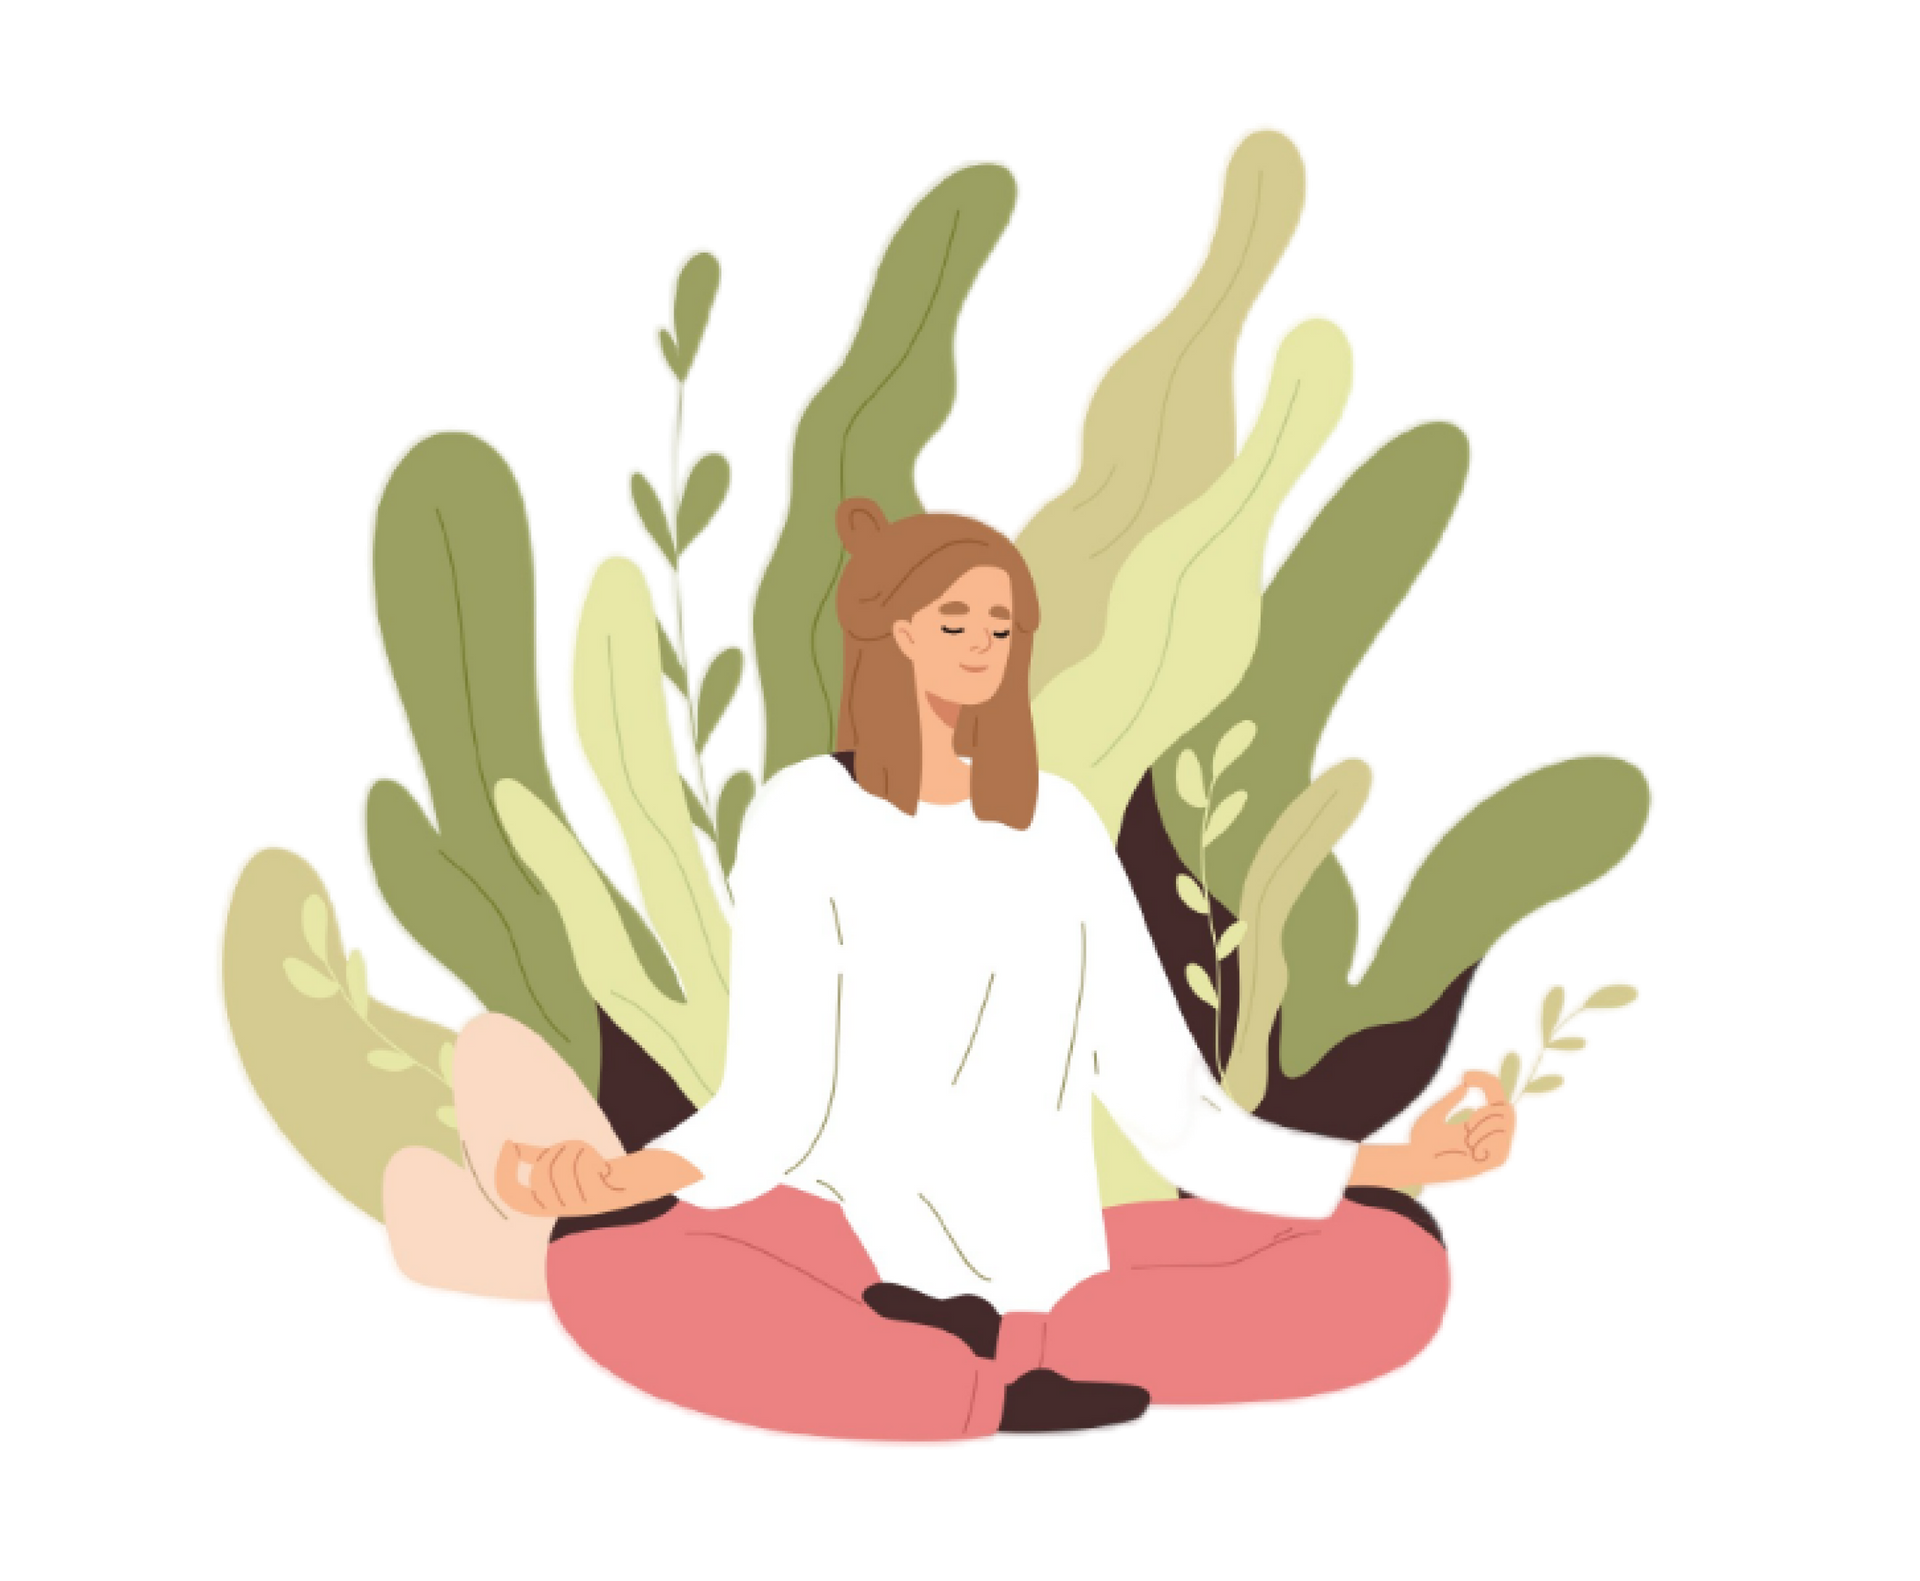 A woman is sitting in a lotus position surrounded by leaves.